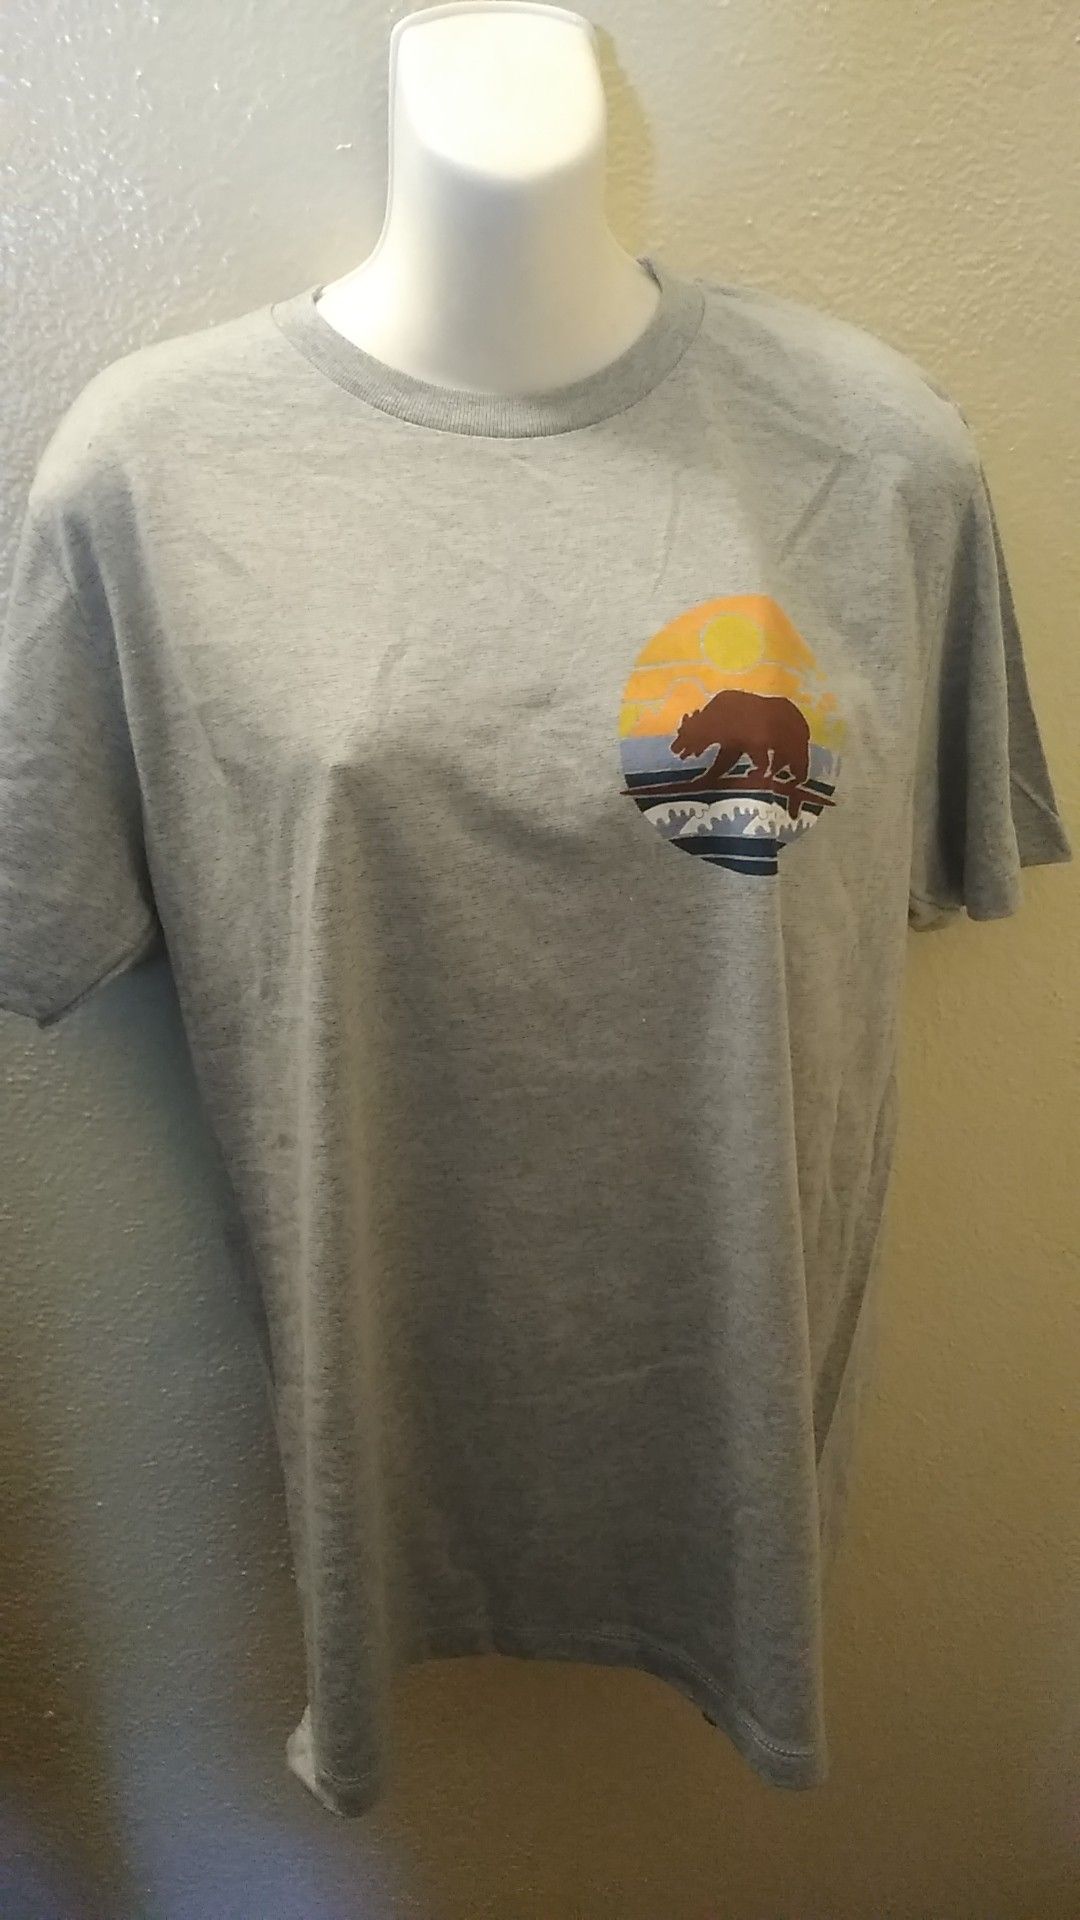 Men's New T-shirt Ocean Current Brand size Medium and Large available